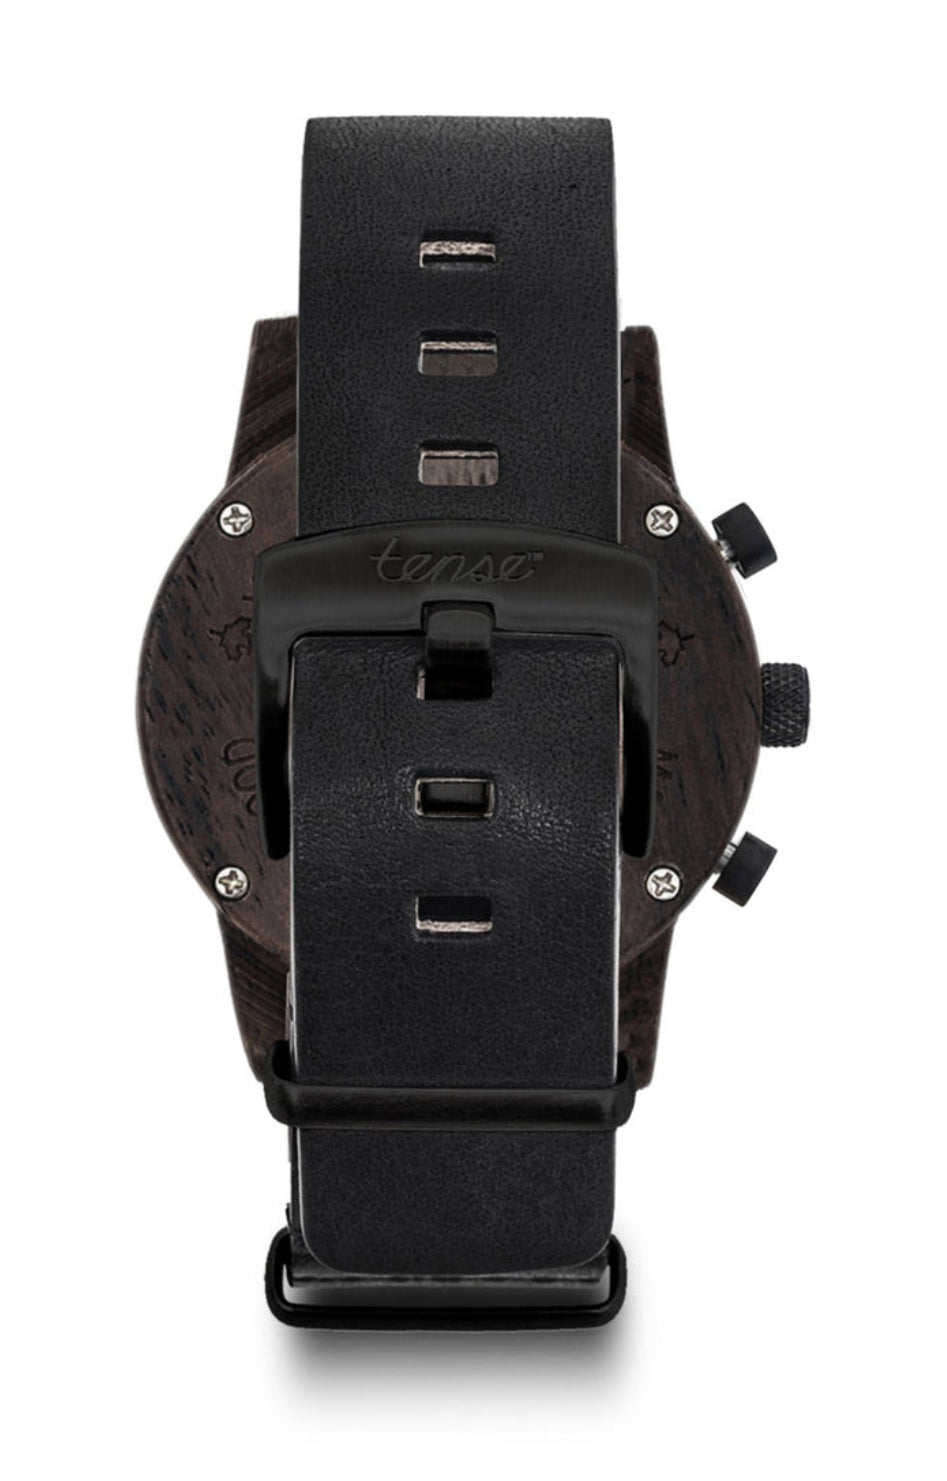 Cambridge Leather Leadwood/Blackout Watch locally Made in Canada 🇨🇦